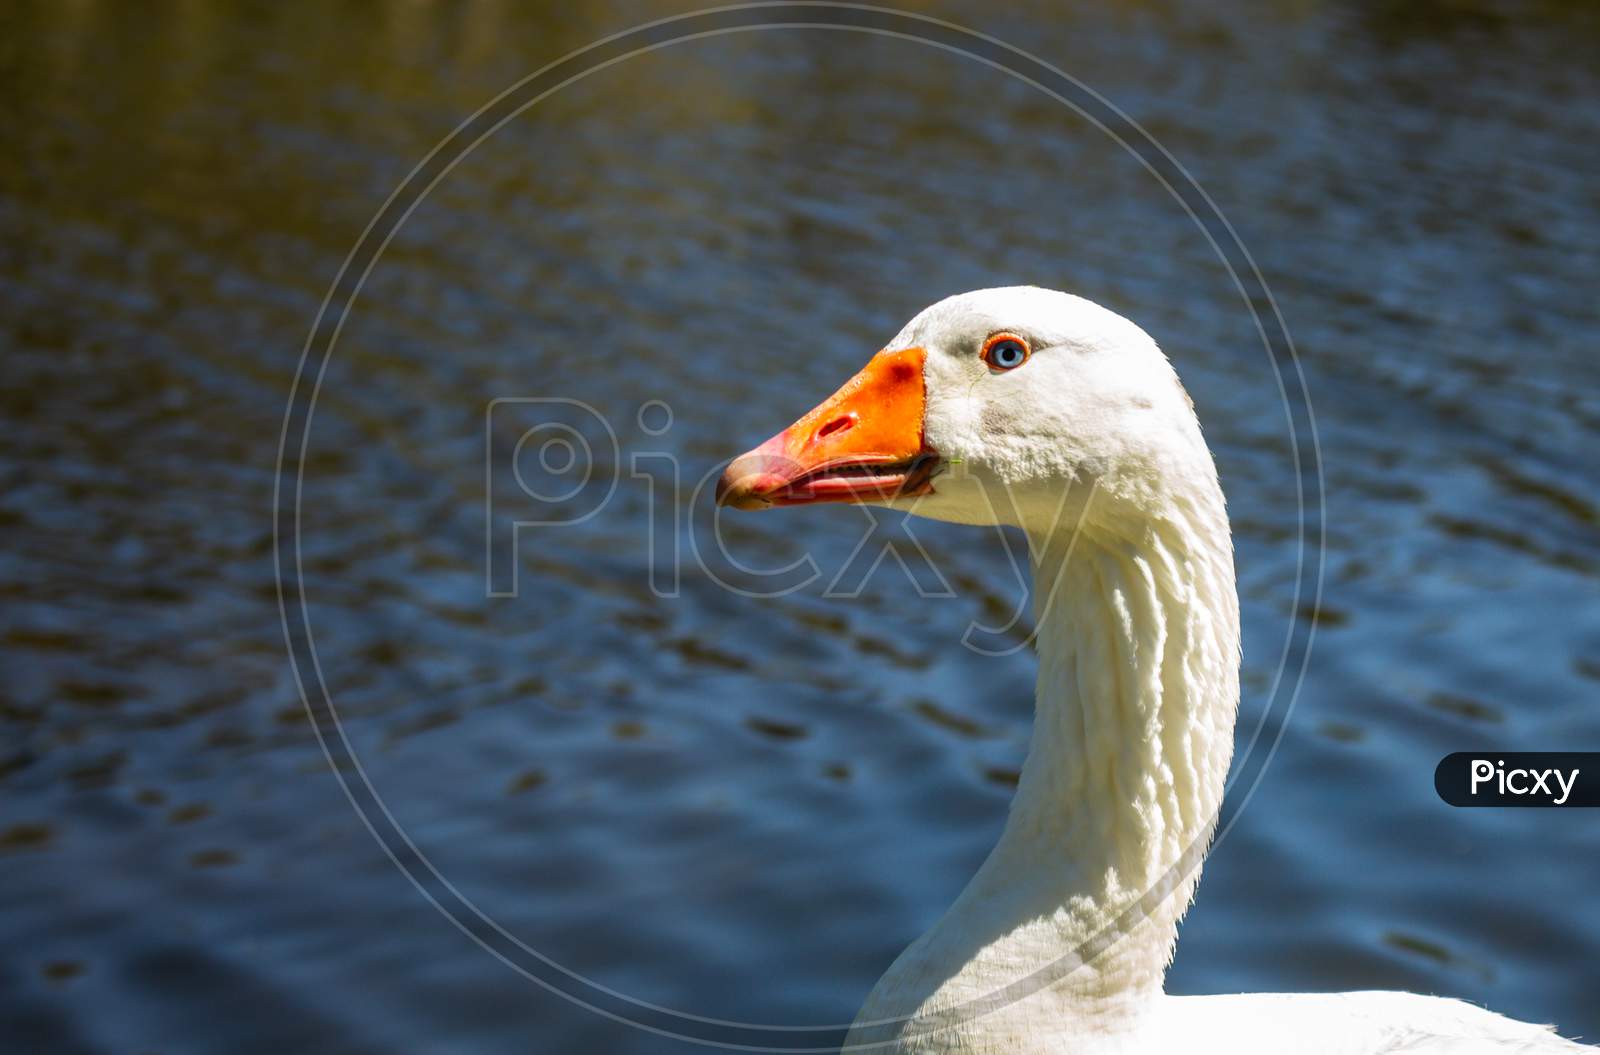 White Feathered Adult Goose In The Sun. Close-Up Of Cute Bird Looking At The Camera. Funny Animal.